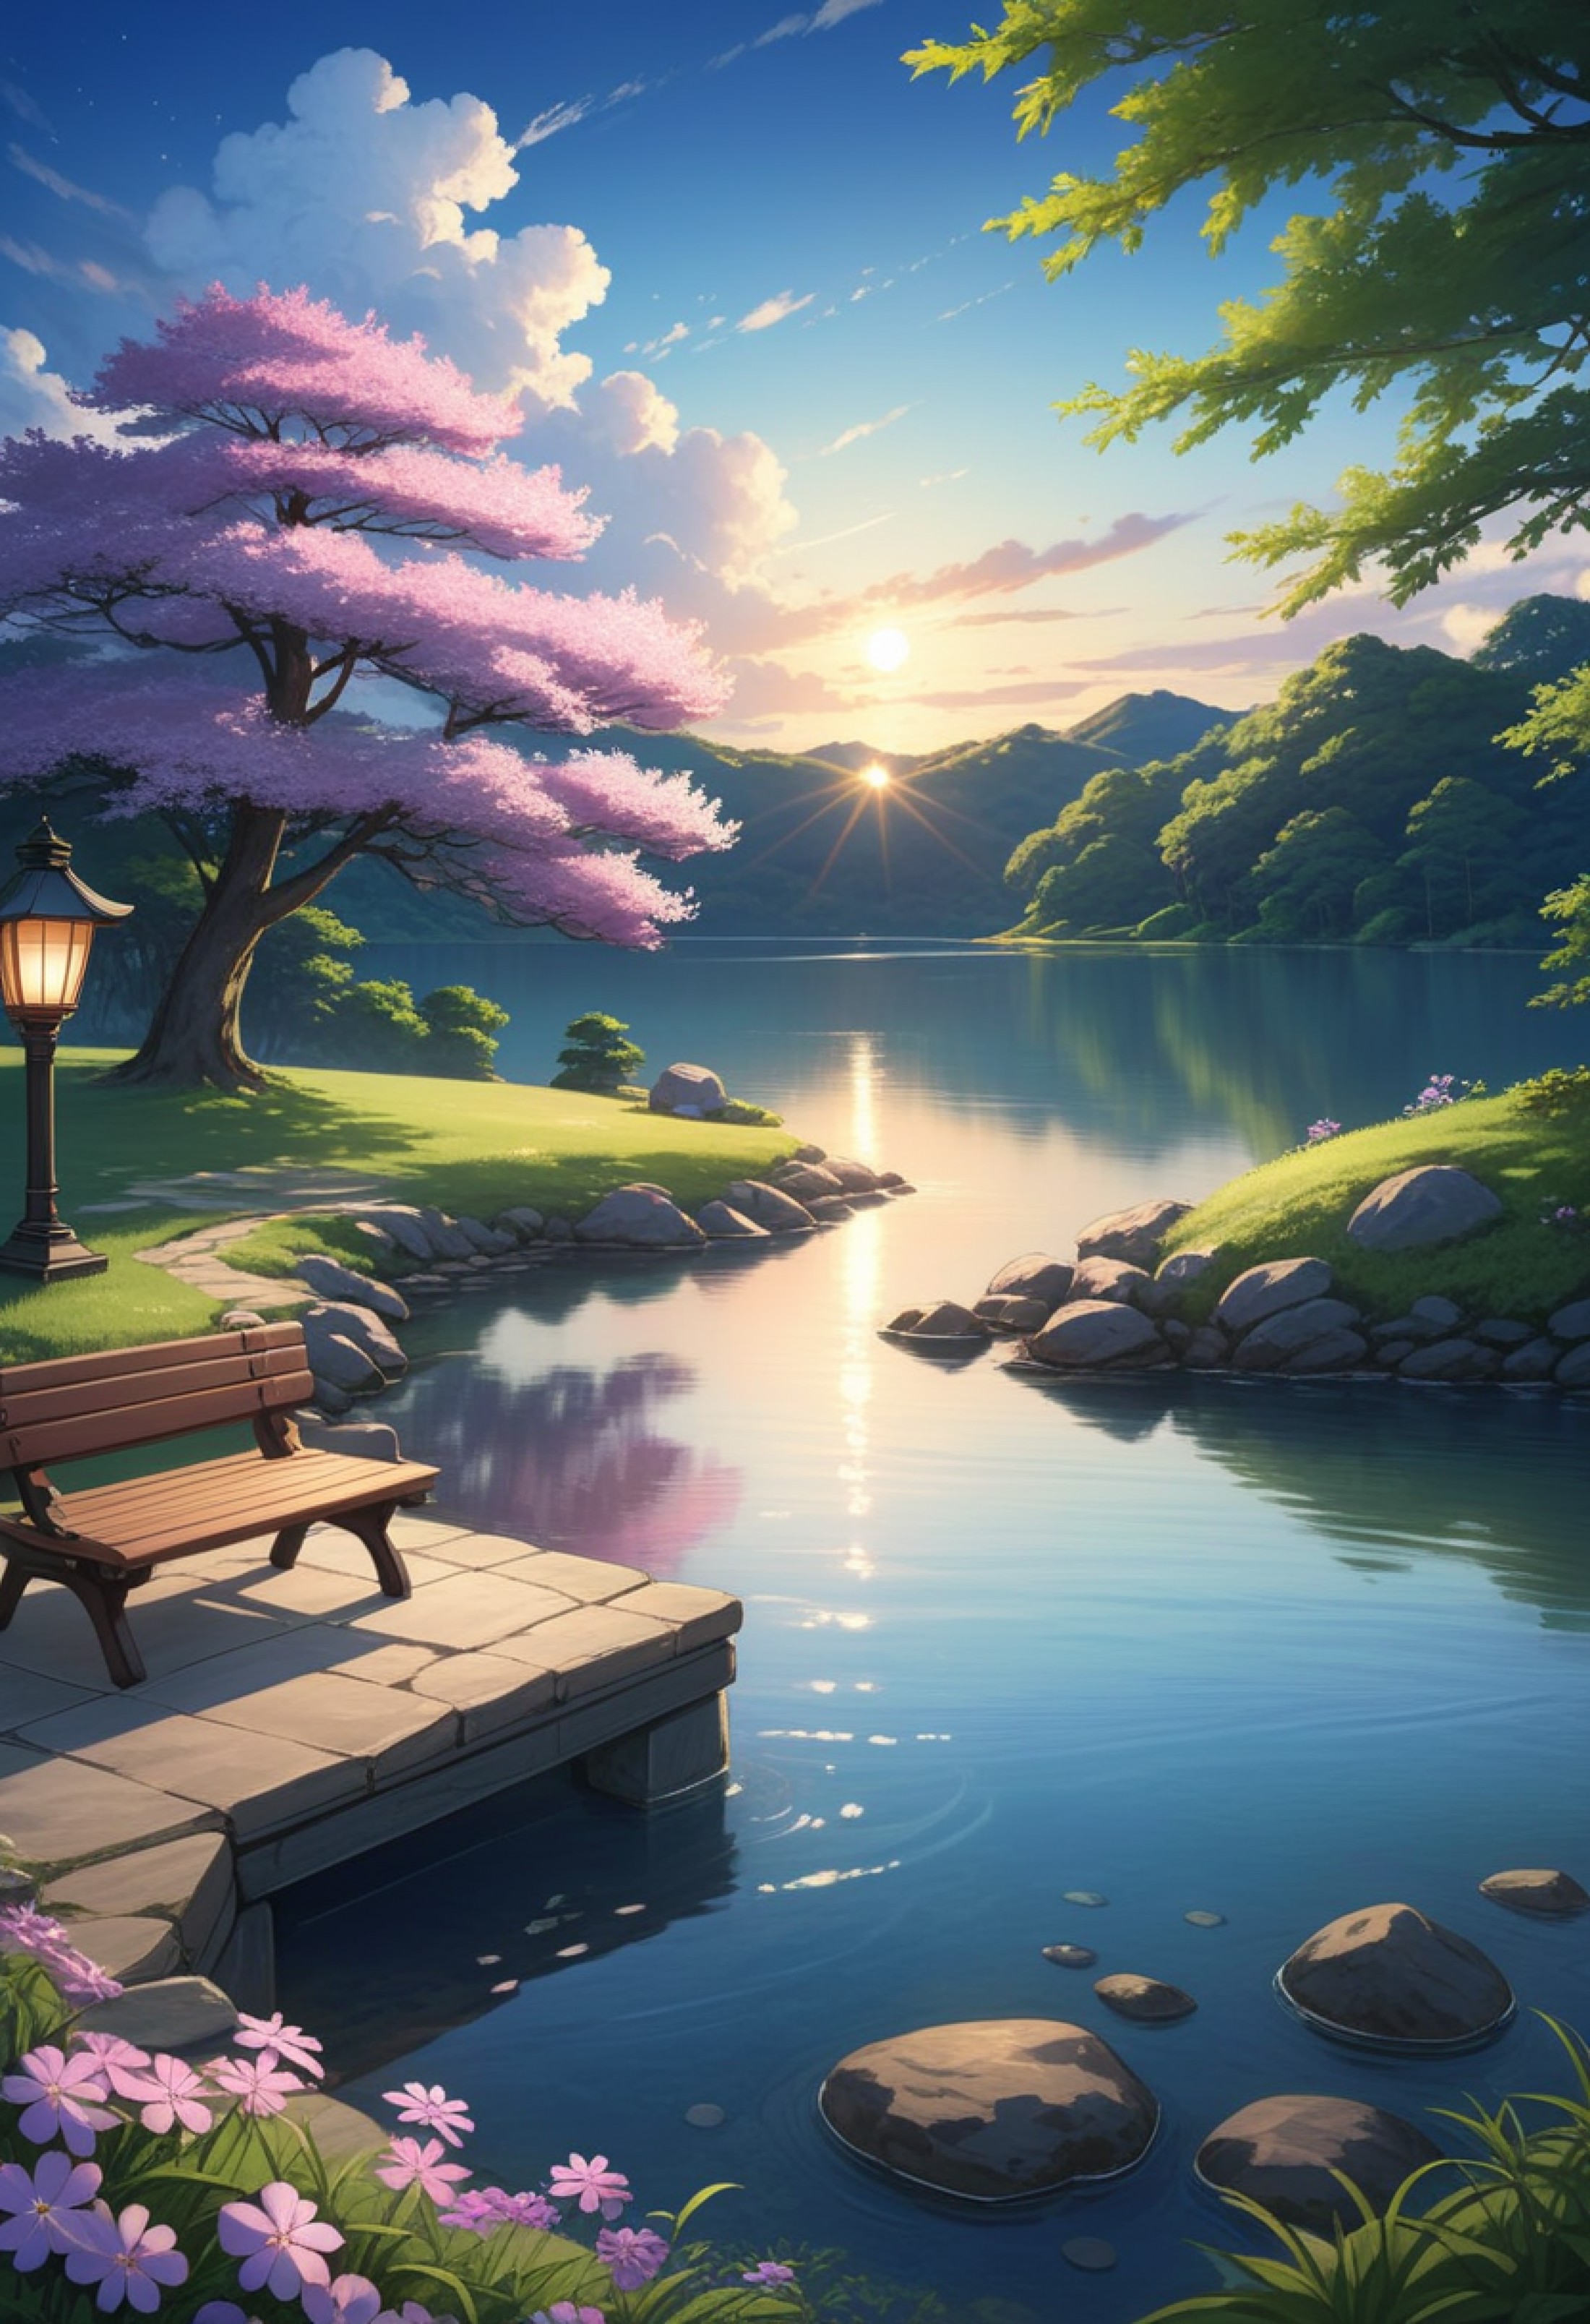 detailed background,( Calm spring night landscape), amongst lush greenery, beautiful view, creeping phlox in full bloom, c...